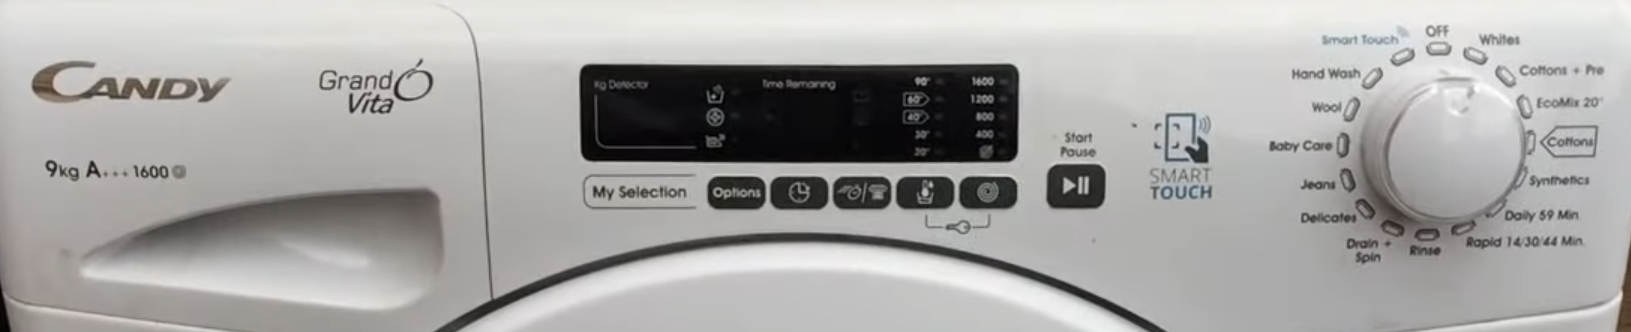 Candy Washing Machine with control panel